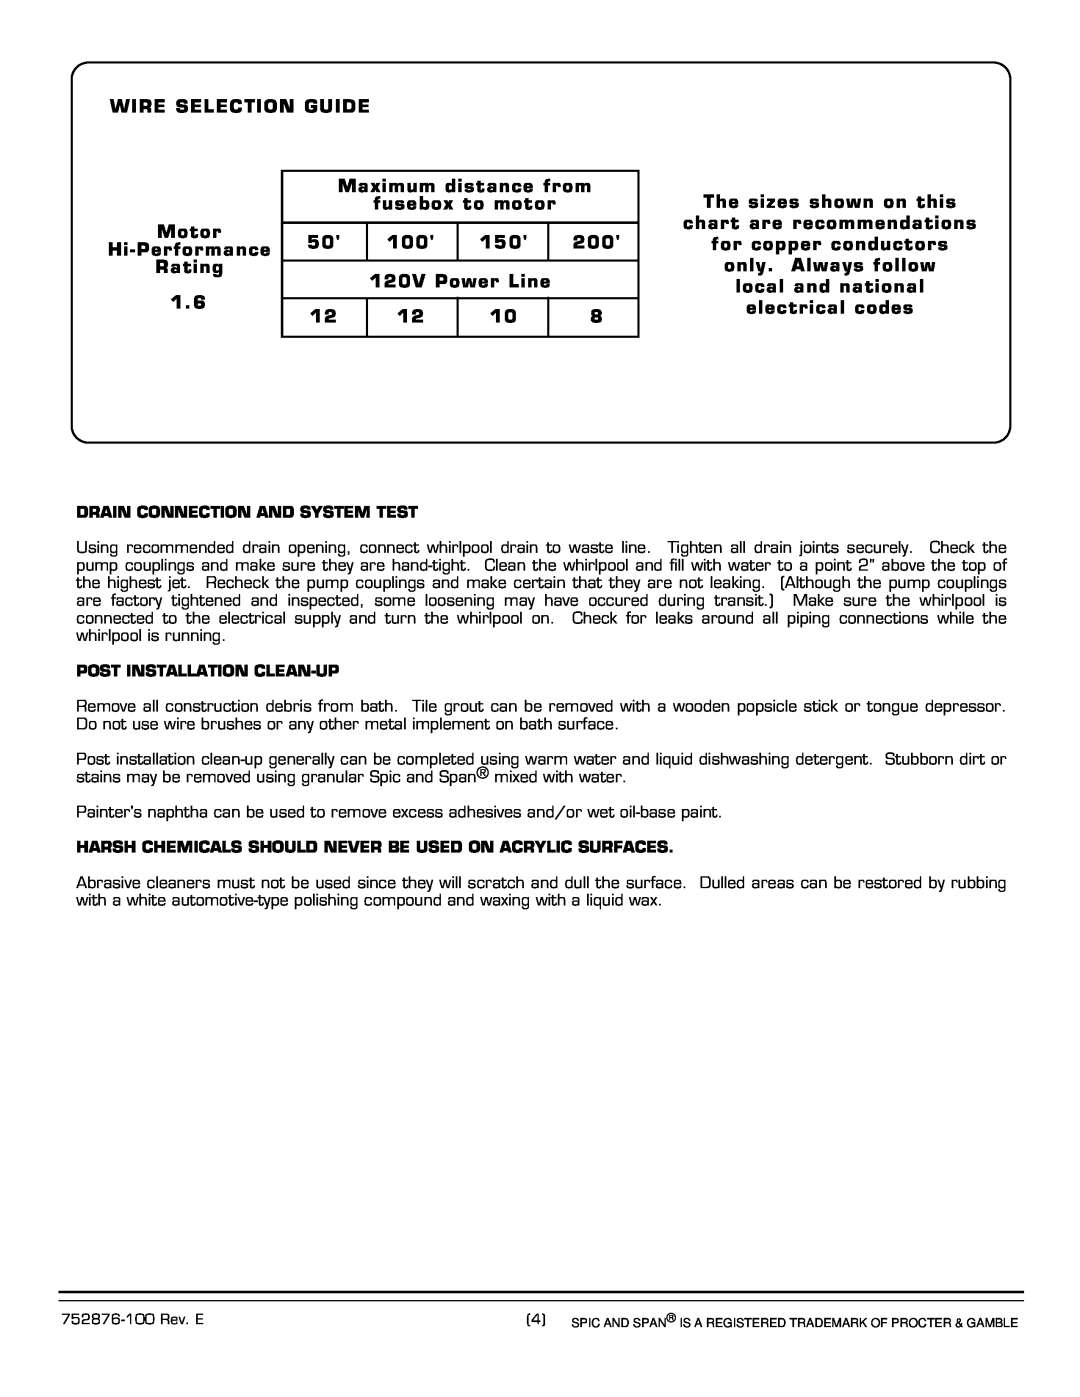 American Standard 2425E-LHO Wire Selection Guide, Maximum distance from, fusebox to motor, Motor, Hi-Performance, Rating 